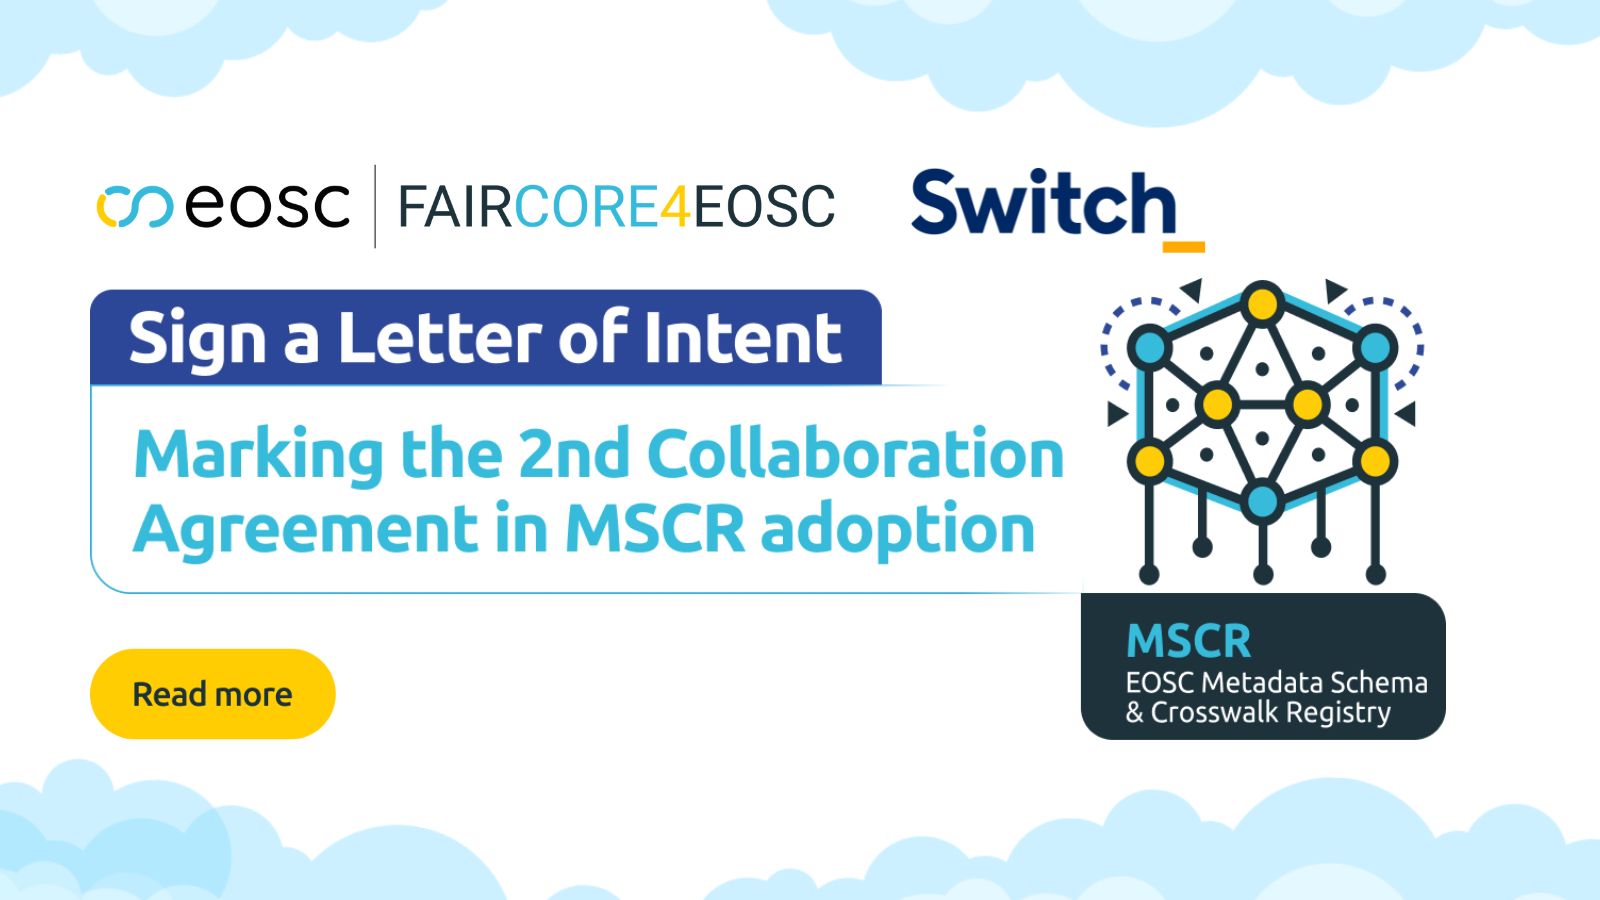 FAIRCORE4EOSC and Switch sign a Letter of Intent, Marking the Second Collaboration Agreement in Metadata Schema and Crosswalk Registry adoption